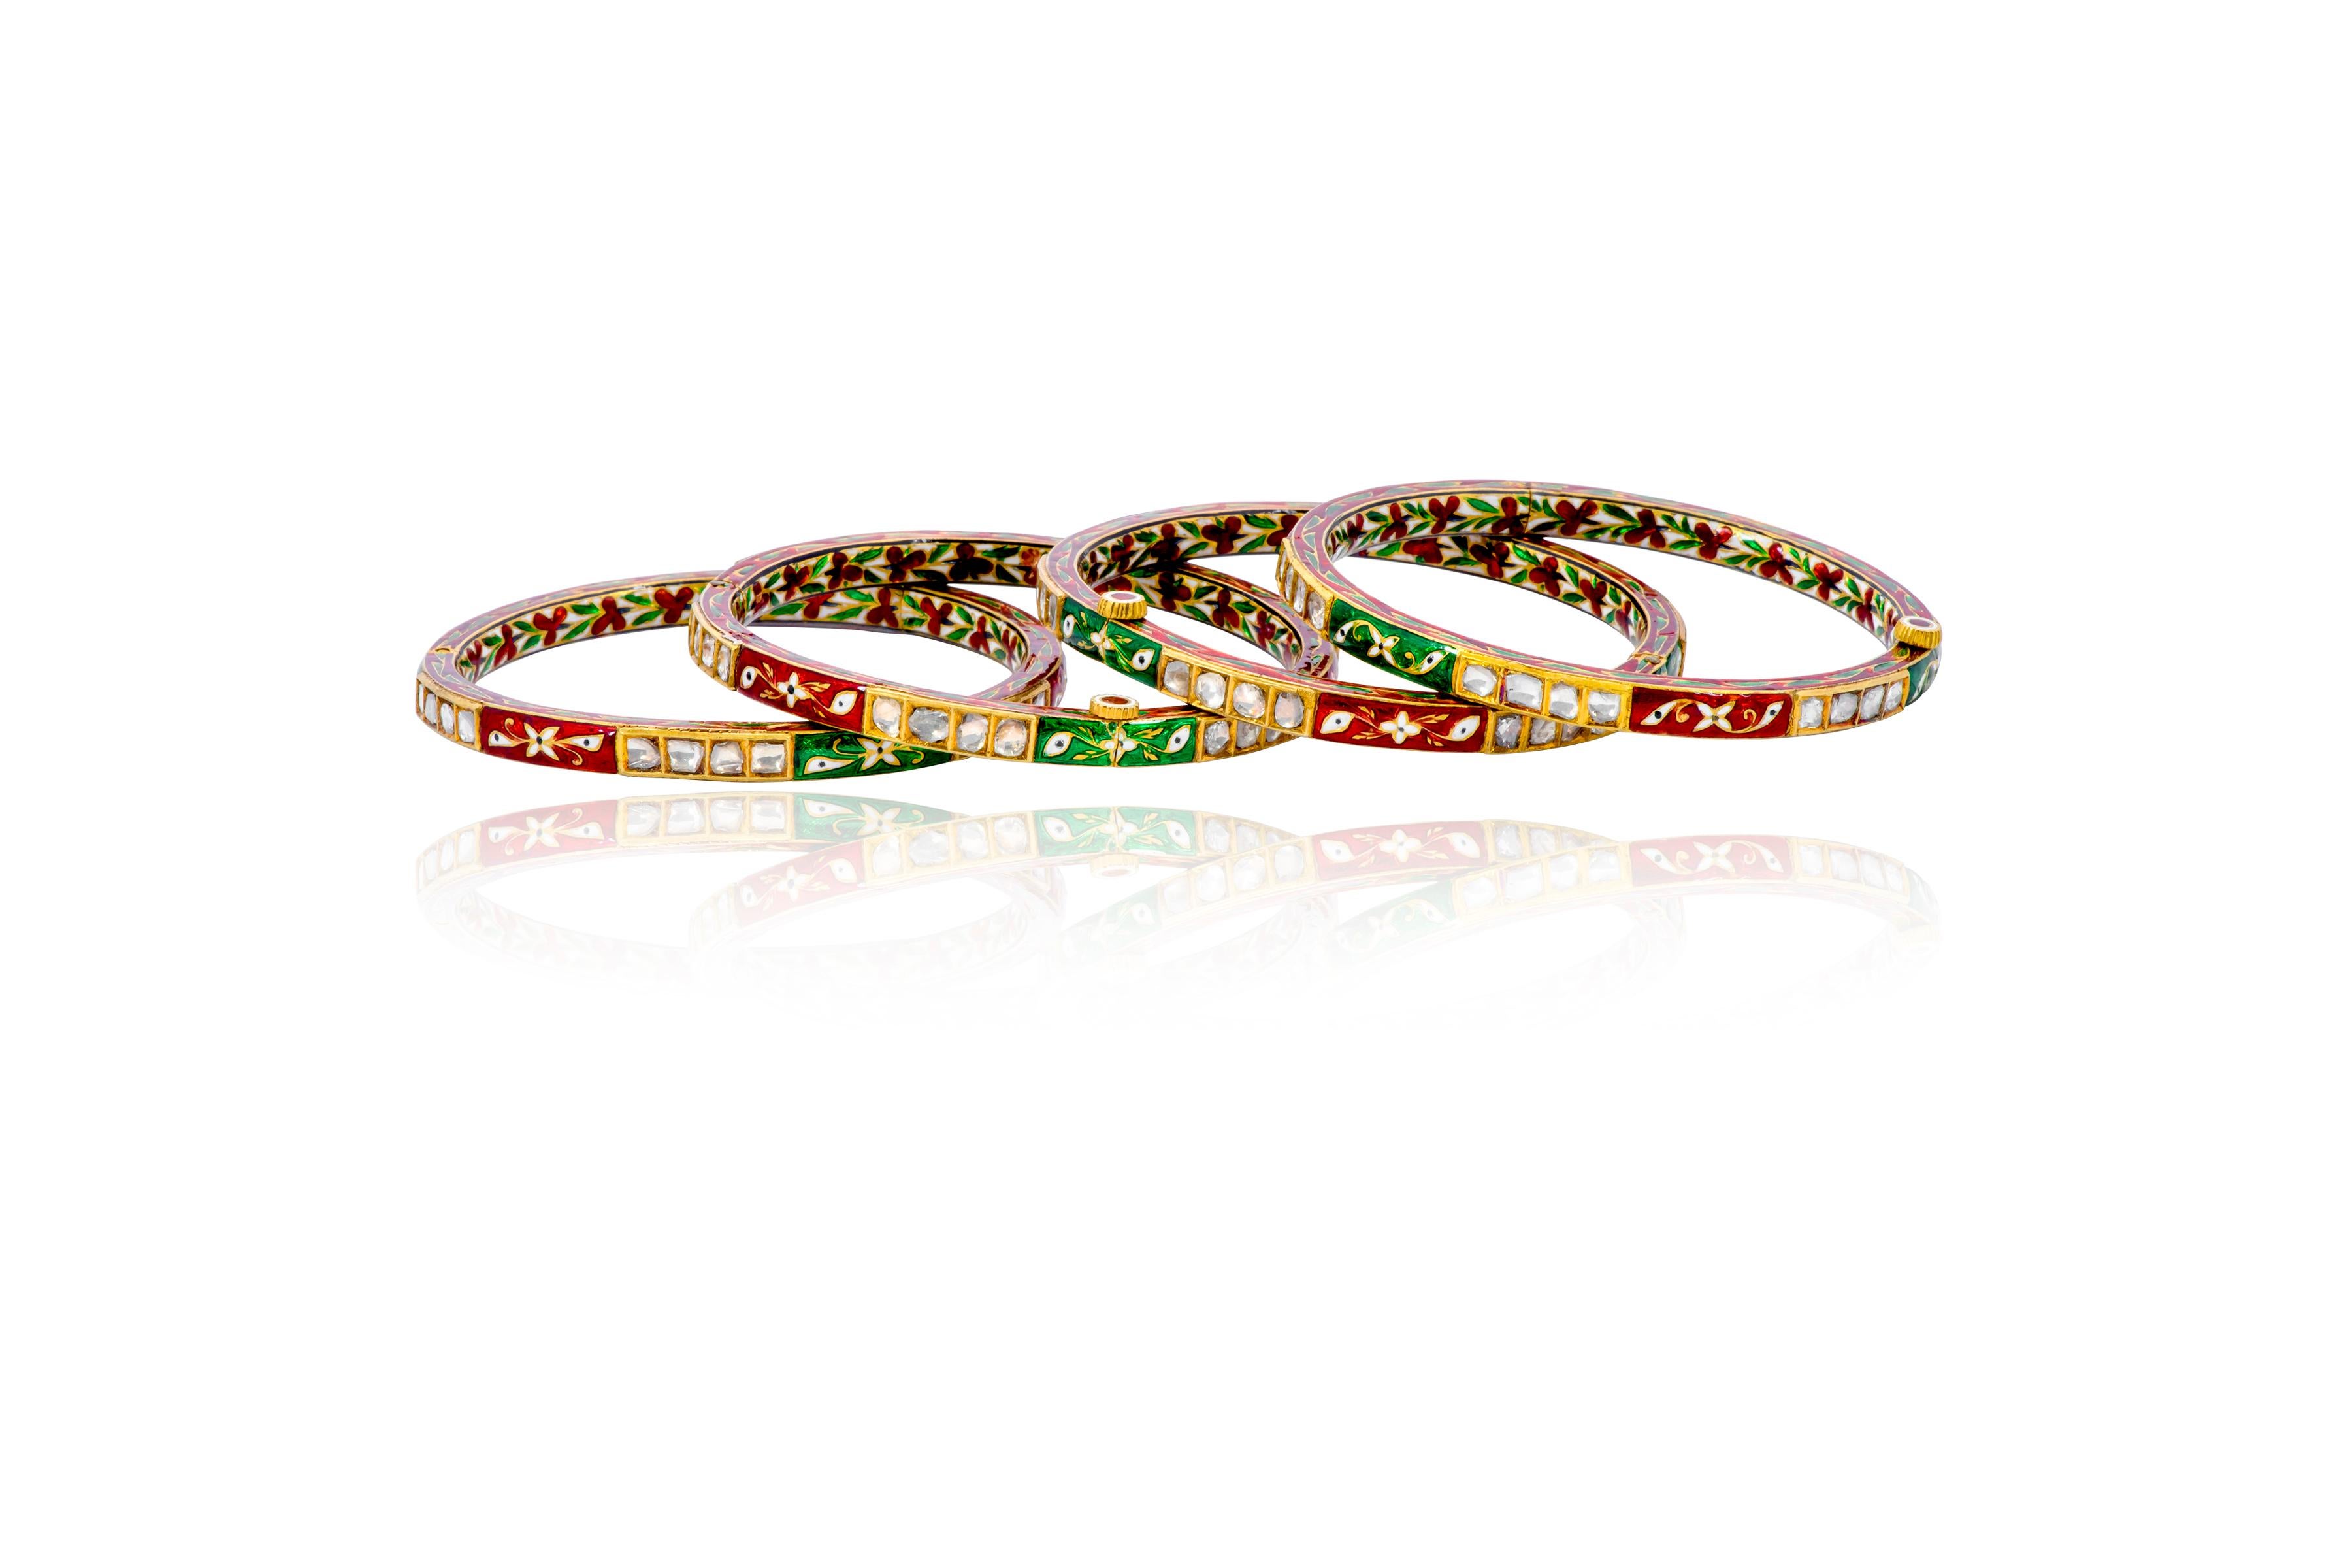 22 Karat Gold Diamond Four Tennis Bangle Bracelets with Colorful Enamel Work

This exemplary Mughal era style hand-made Polki diamond single line bangle with colorful enamel is eternal. The bangle design is the typical “churi” style with solitaire